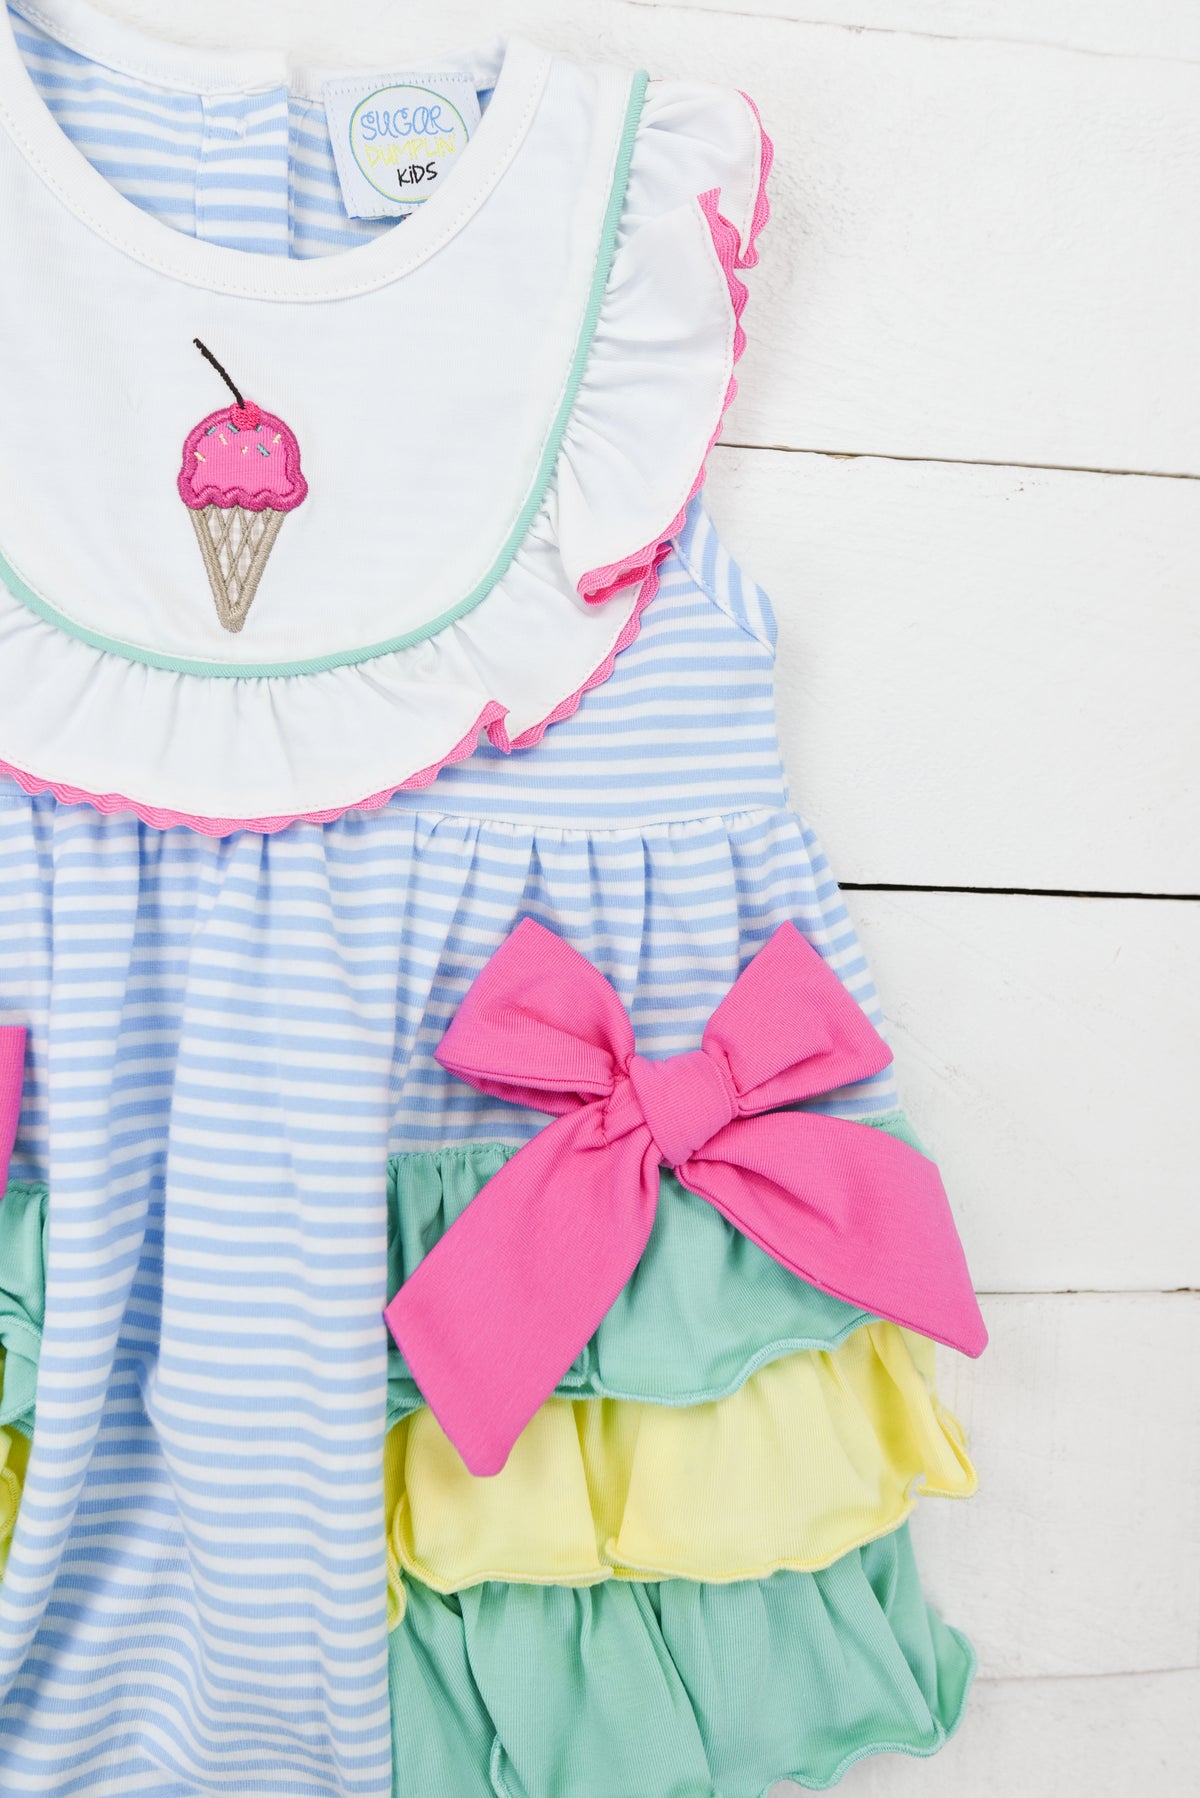 a blue and white striped dress with a pink ice cream cone on it